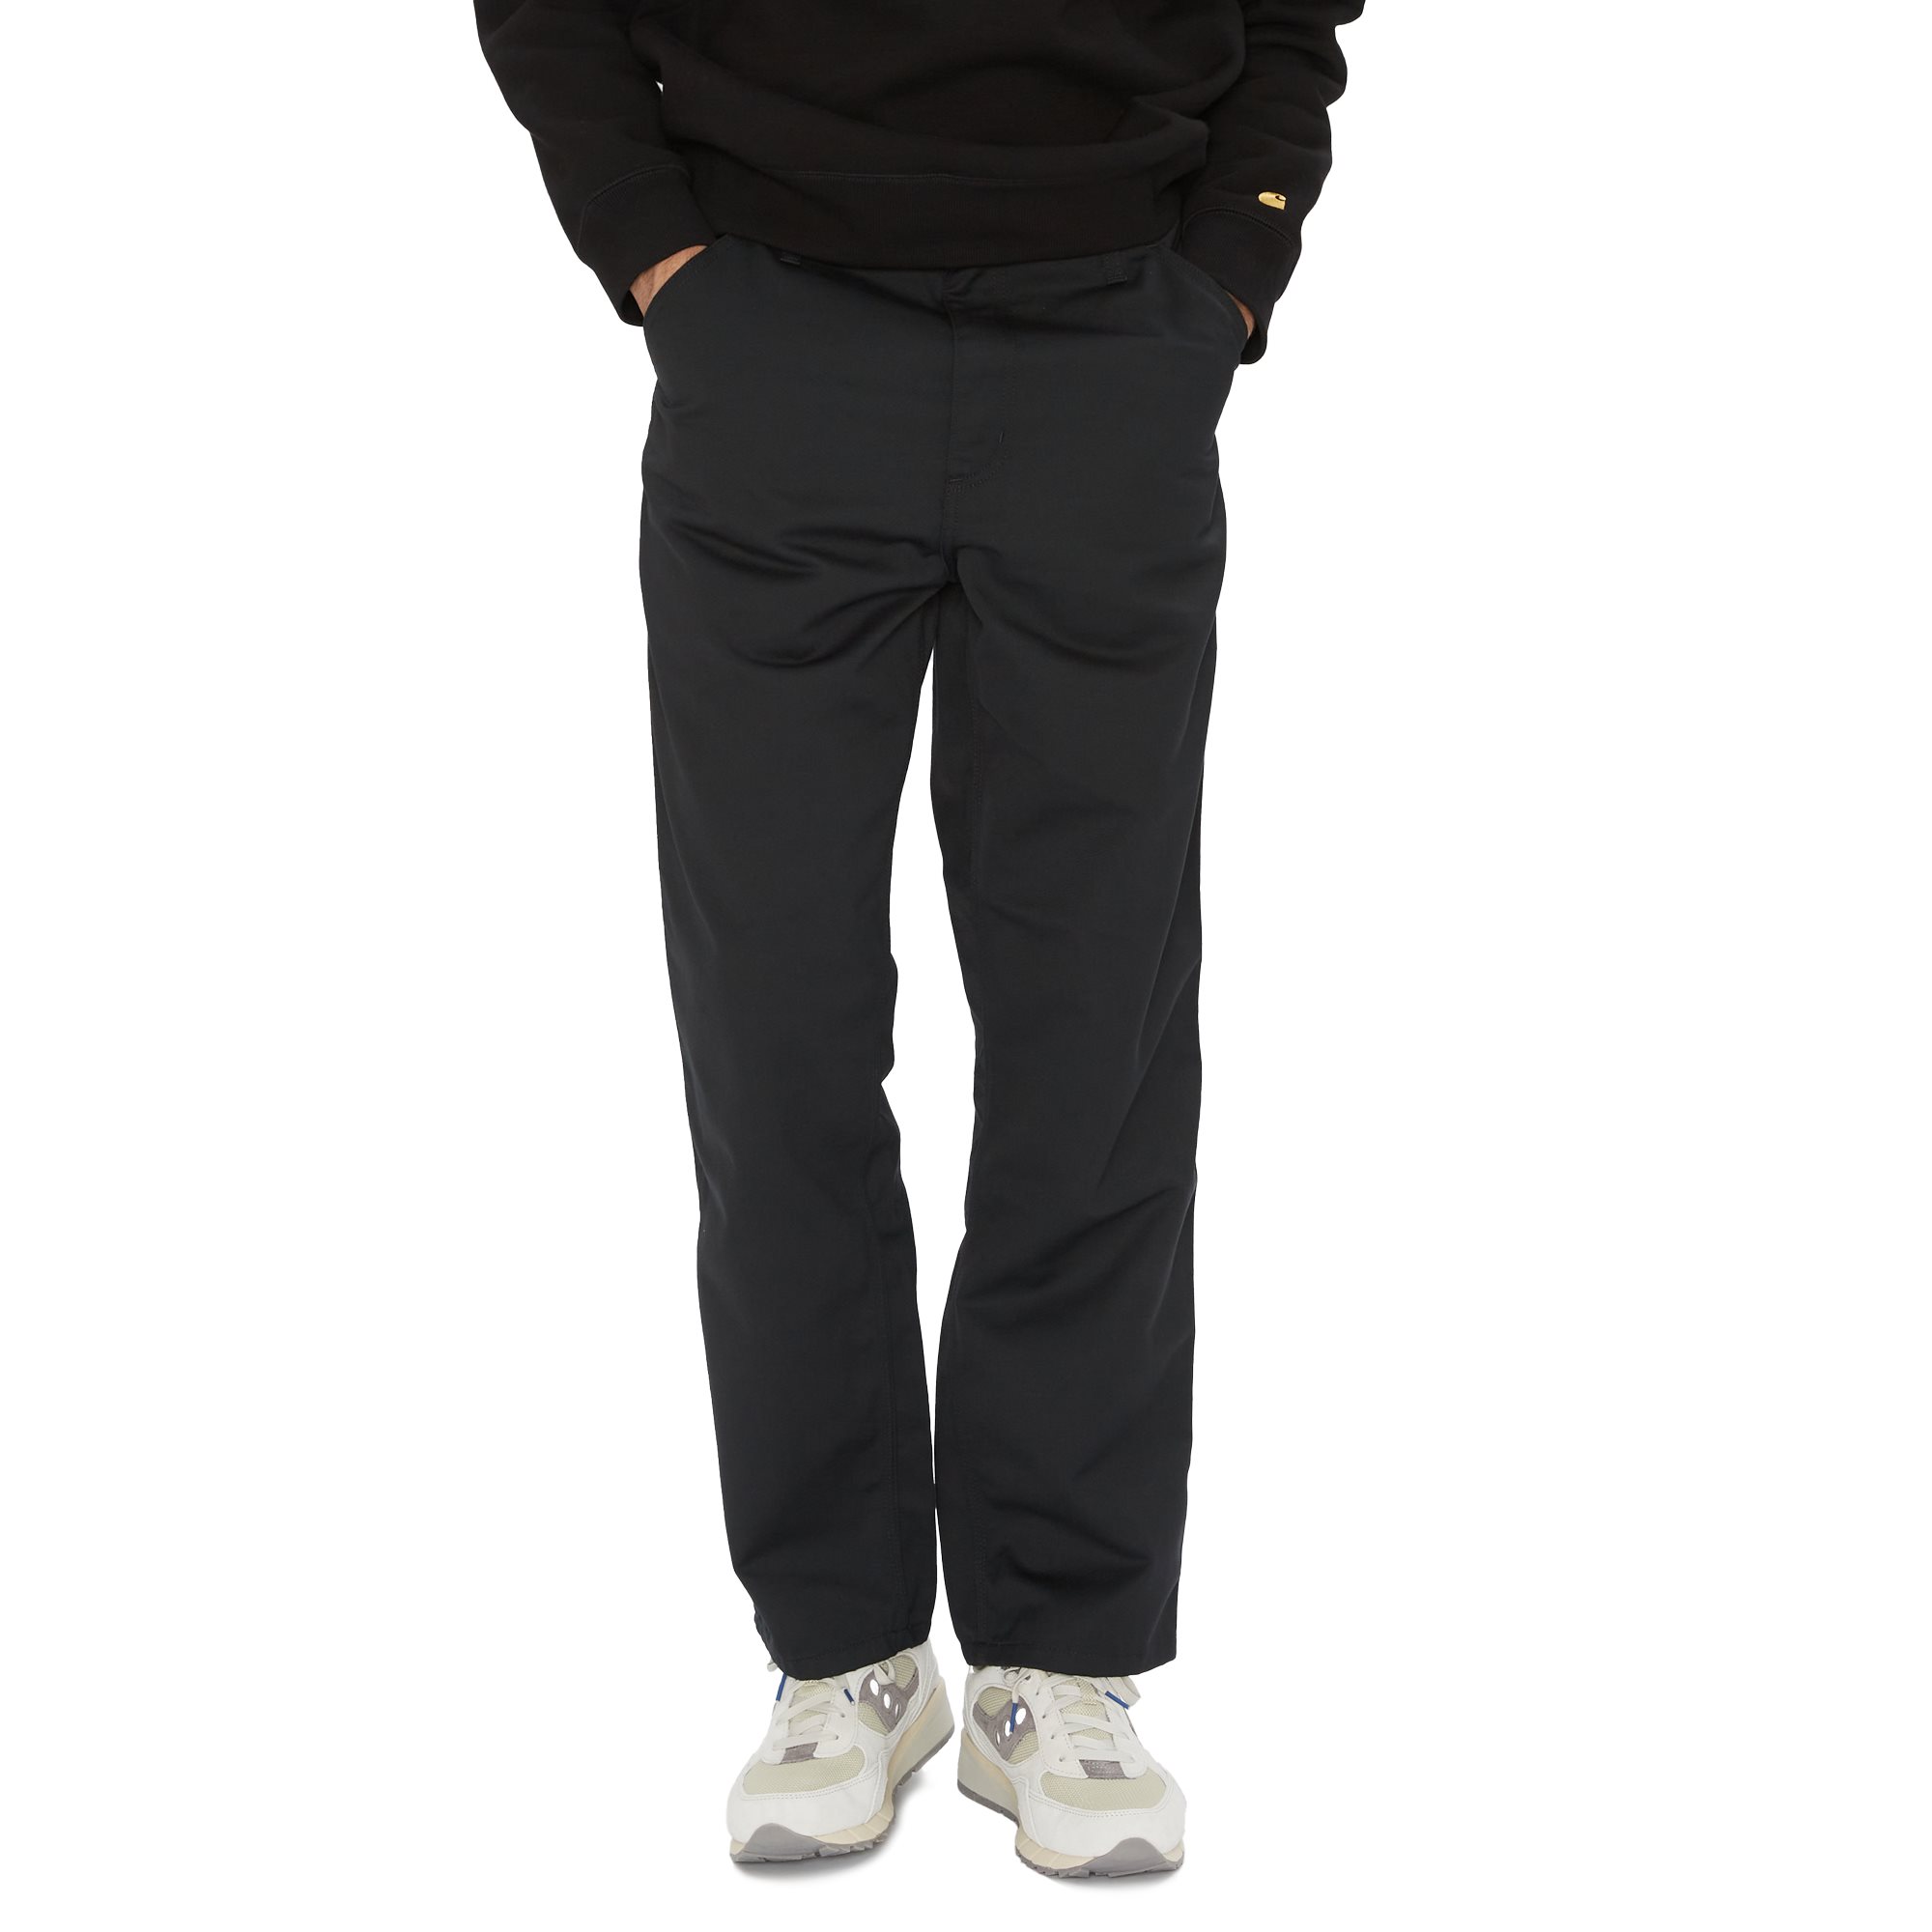 Simple Pant - Trousers - Straight fit - Black